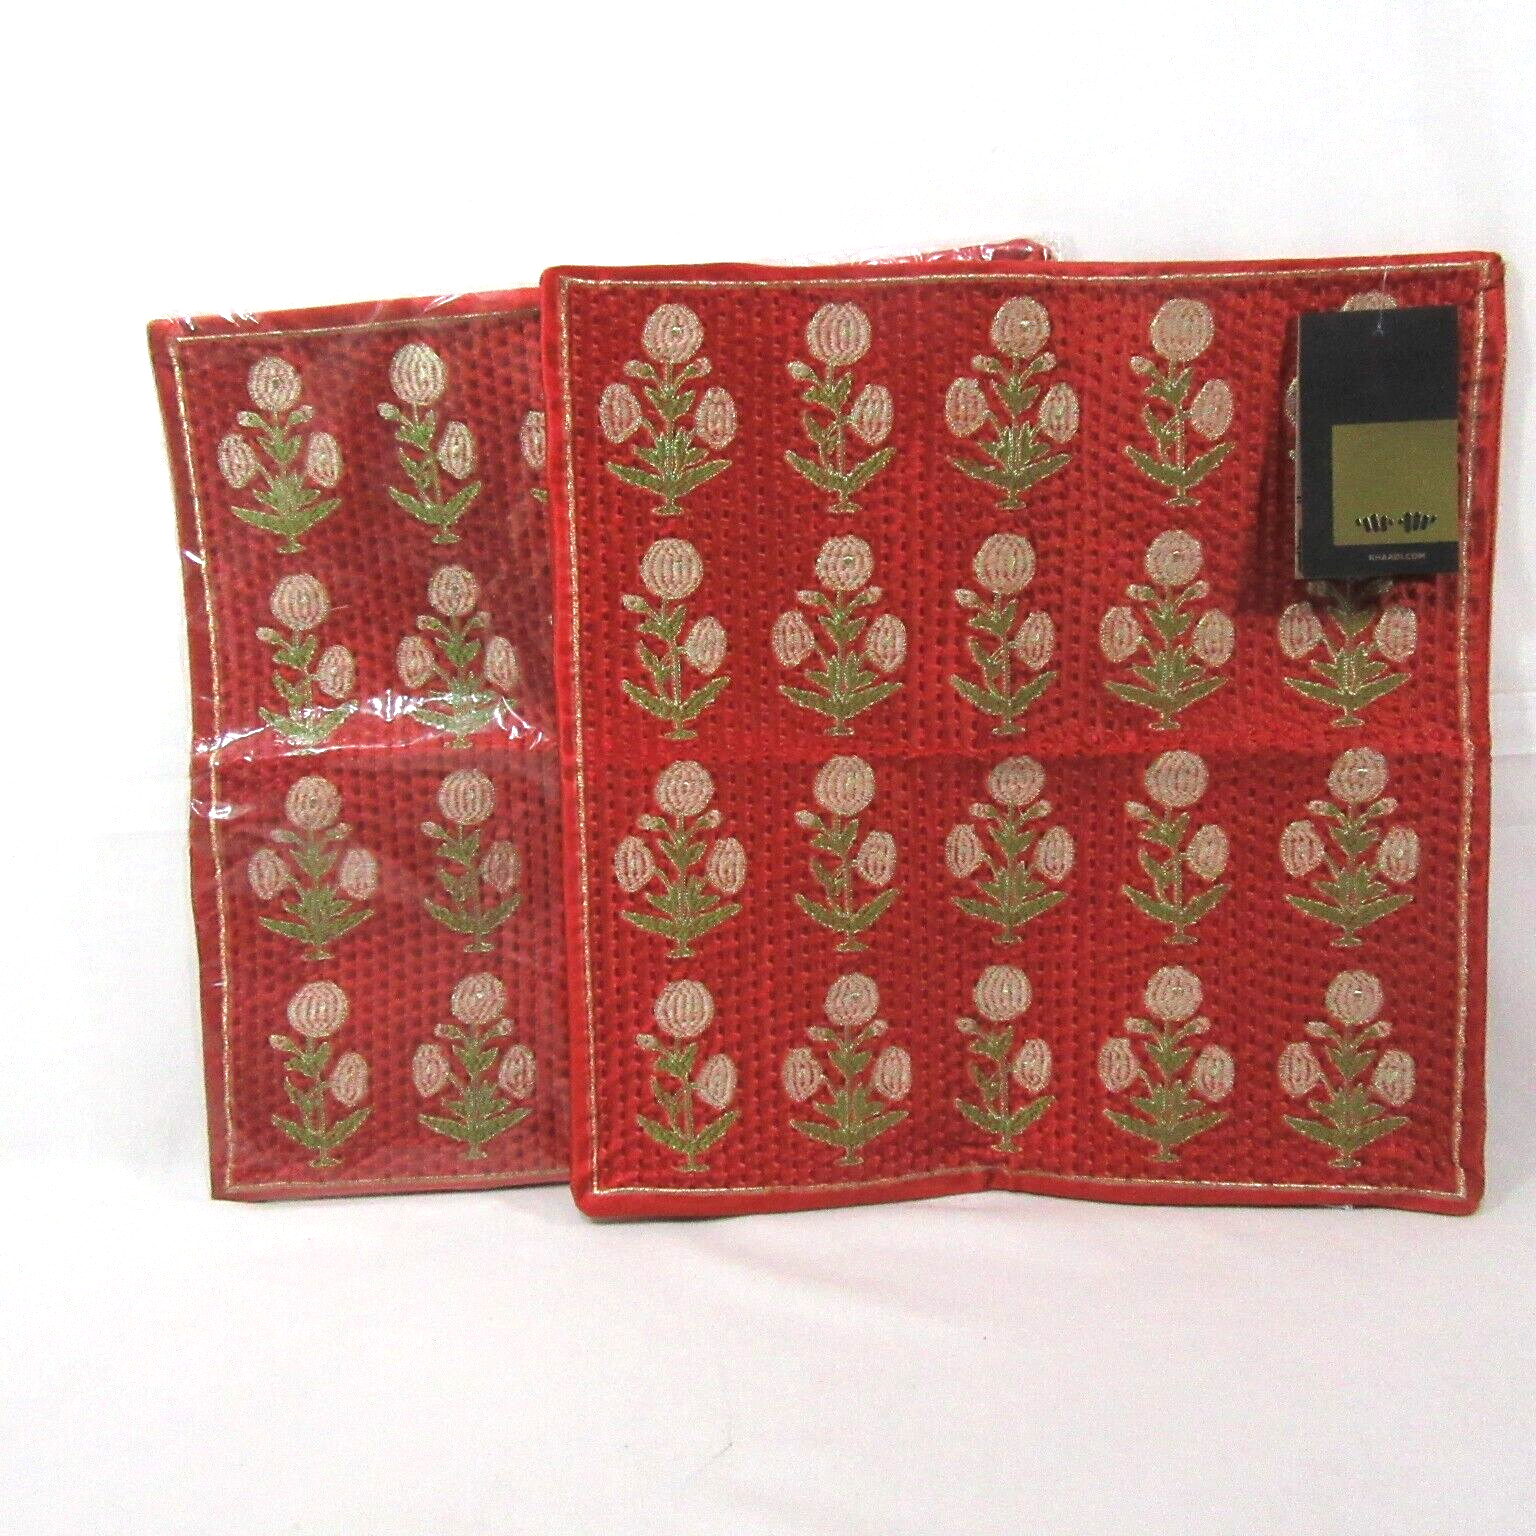 KHAADI 20121 Embroidered Floral Red Velvet 2-PC 16-inch Square Pillow Covers - $58.00